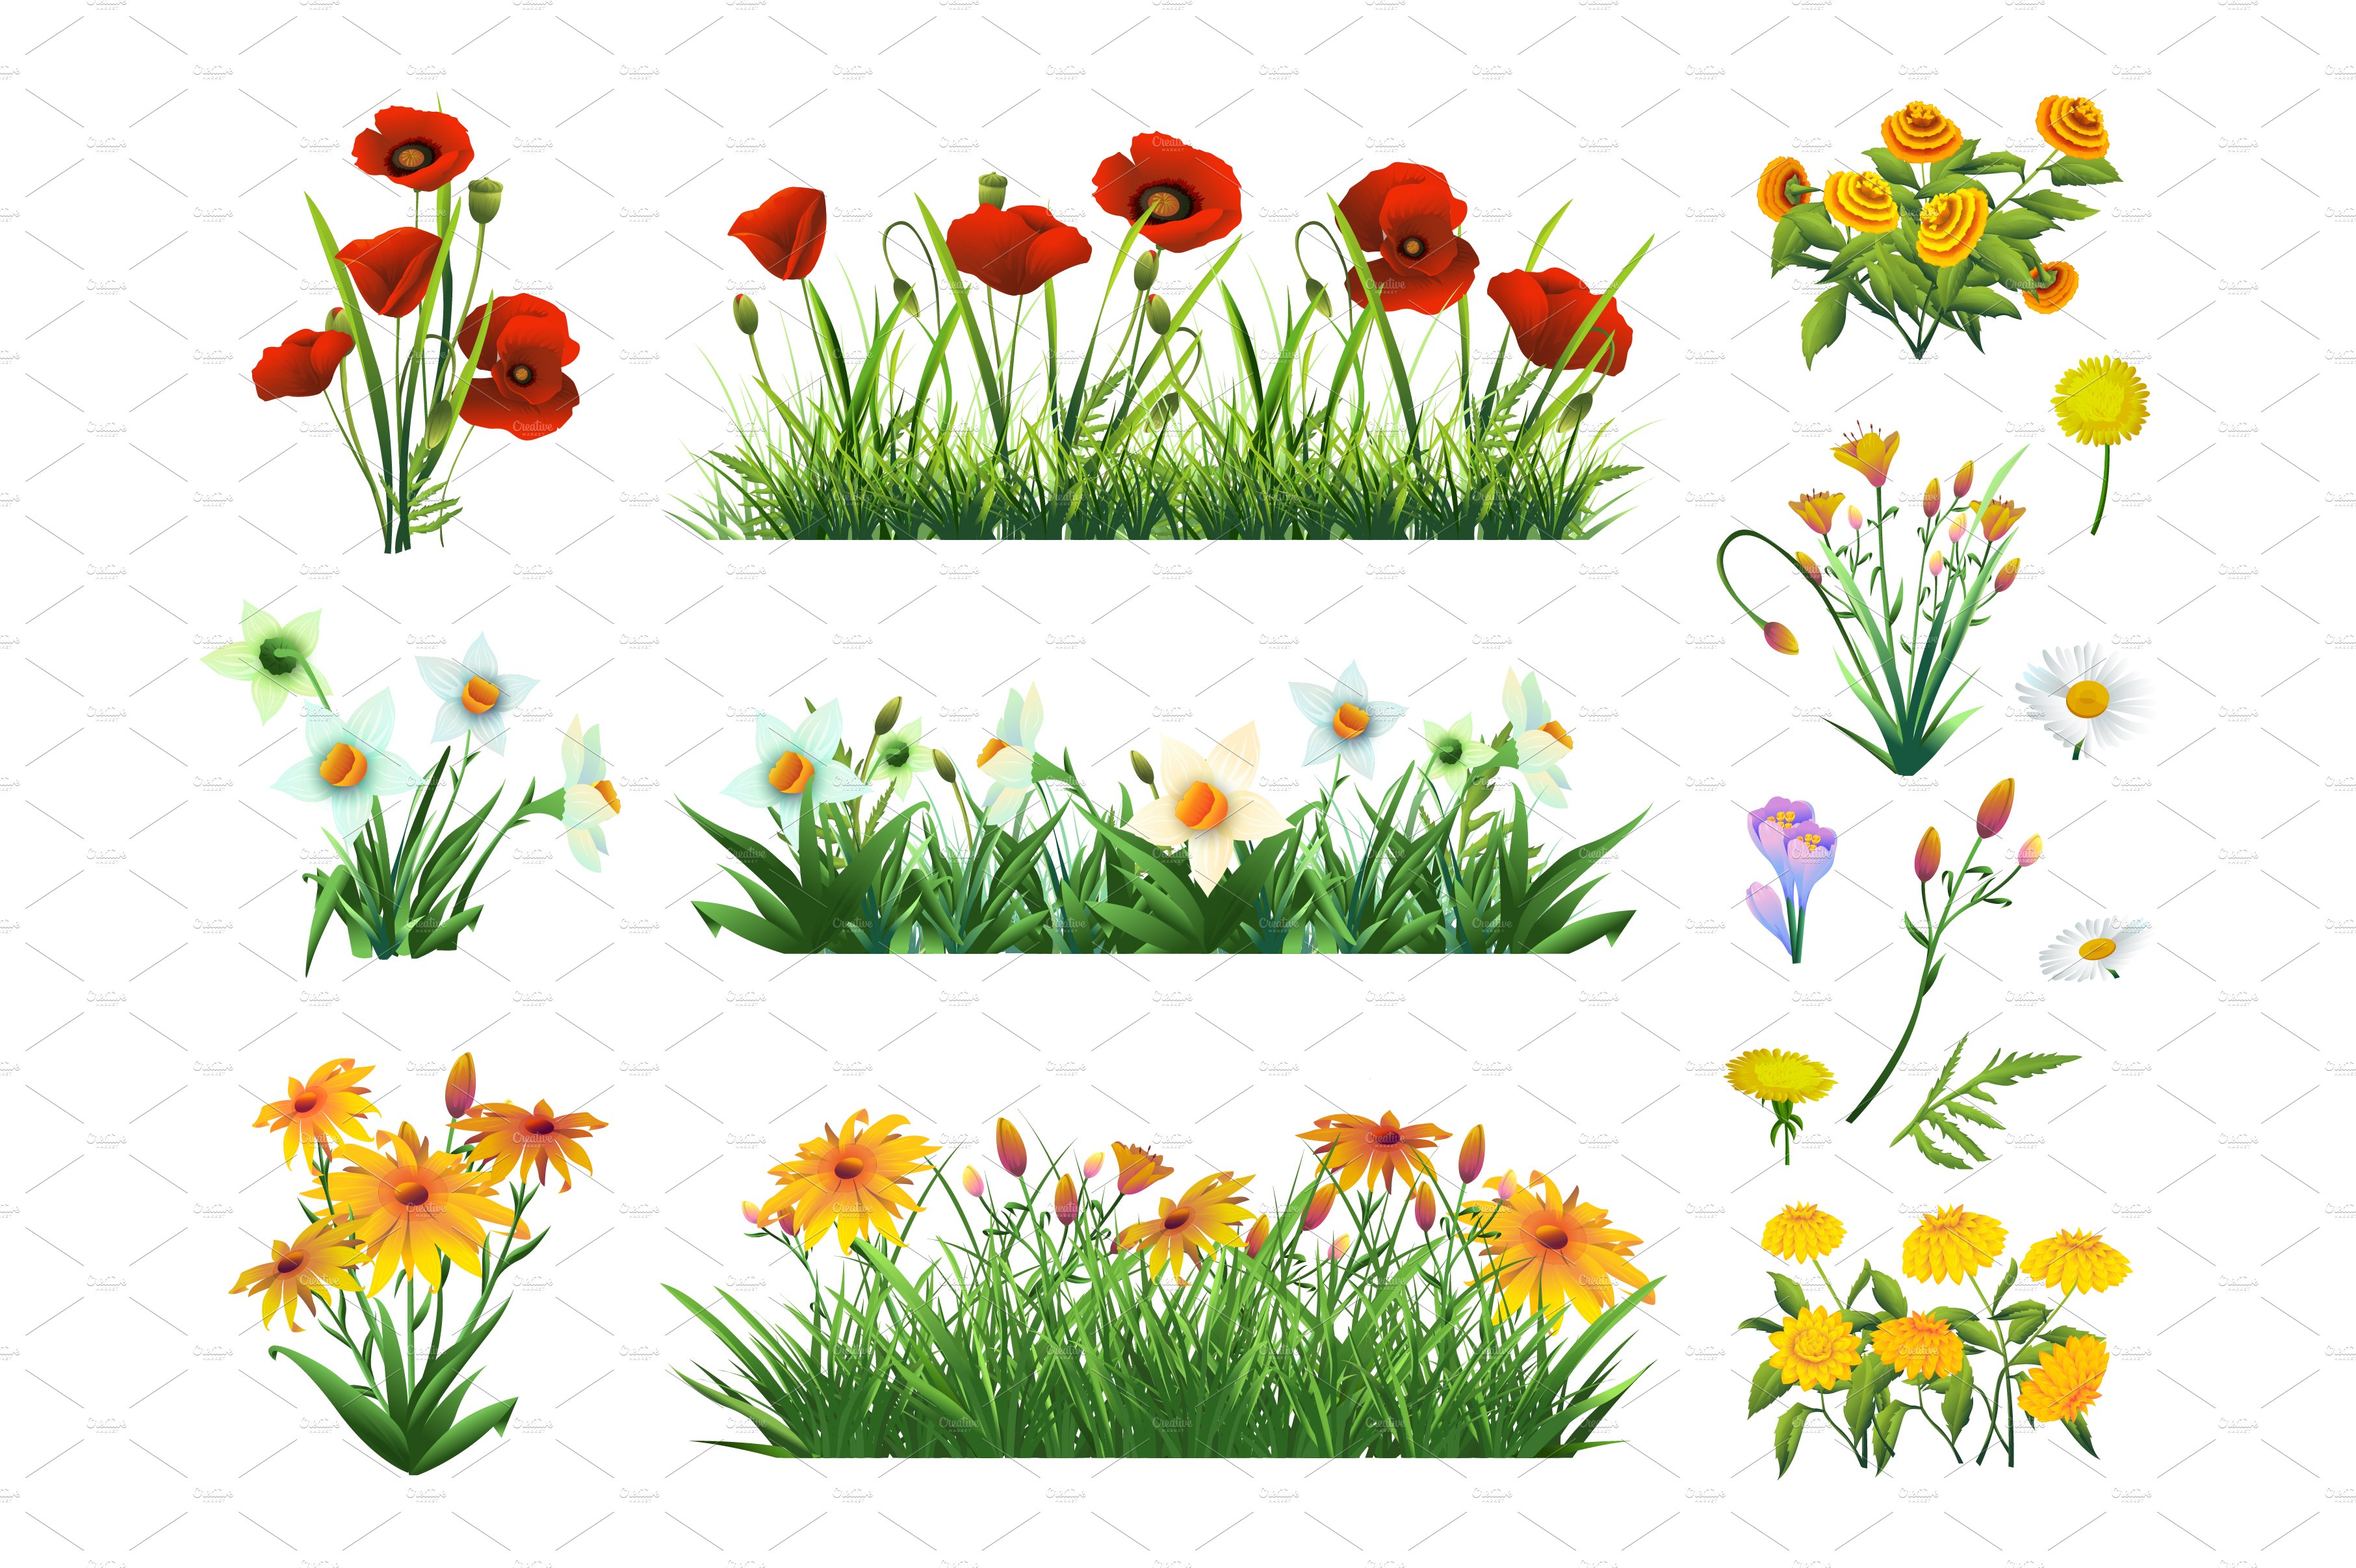 Flowers, grass, nature, ecology icon cover image.